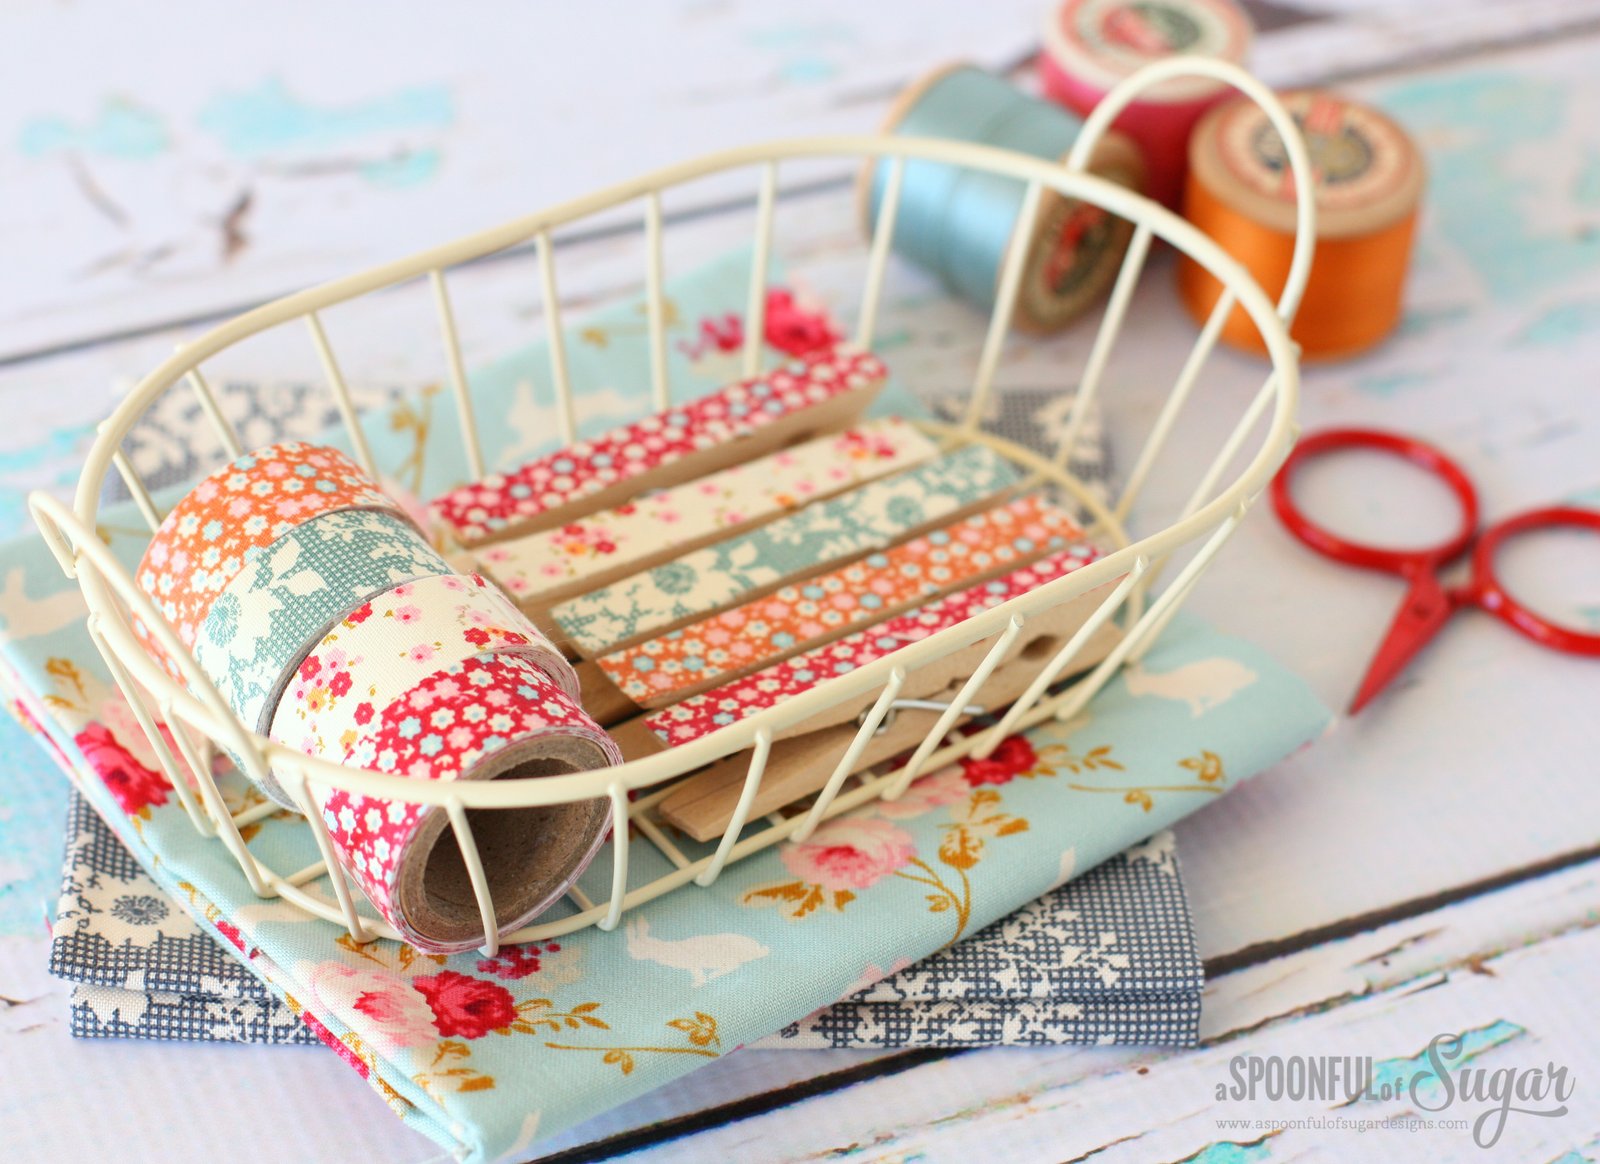 Decorate pegs (clothespins) with fabric tape